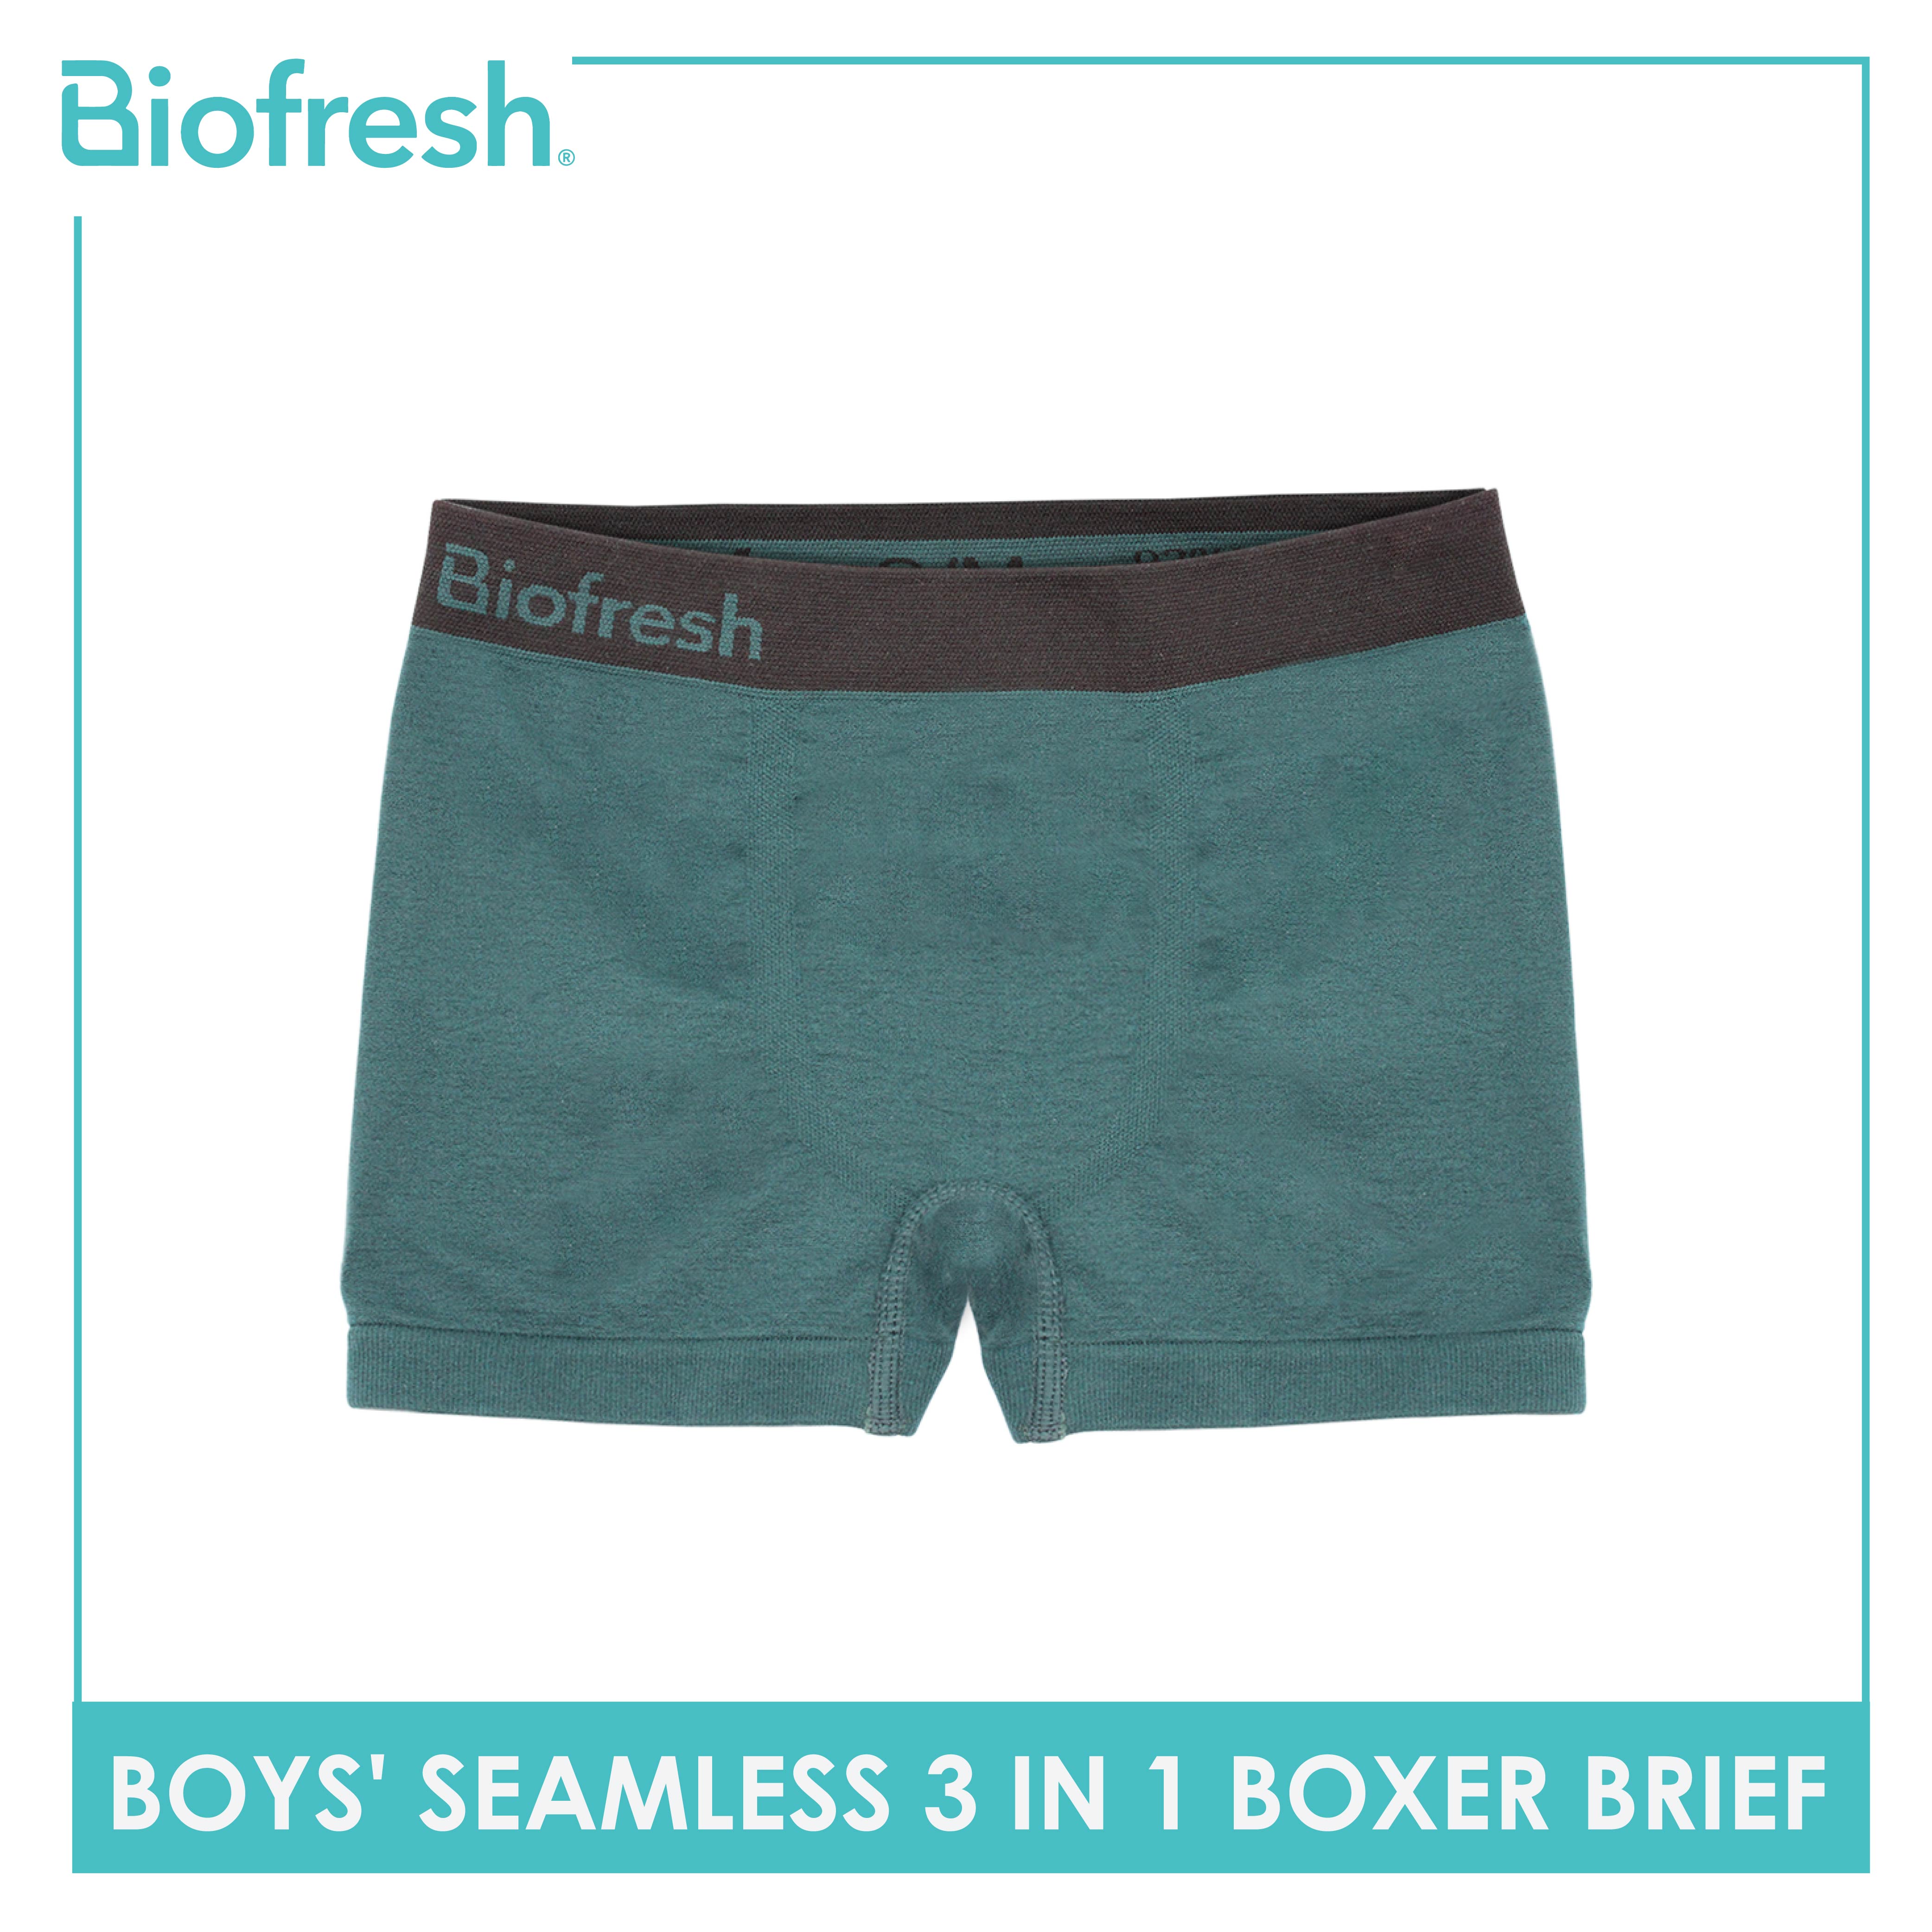 Biofresh Men's Nylon Breathable Boxer Brief 5 pieces in 1 pack OUMBBG2  (Limited Time Offer)